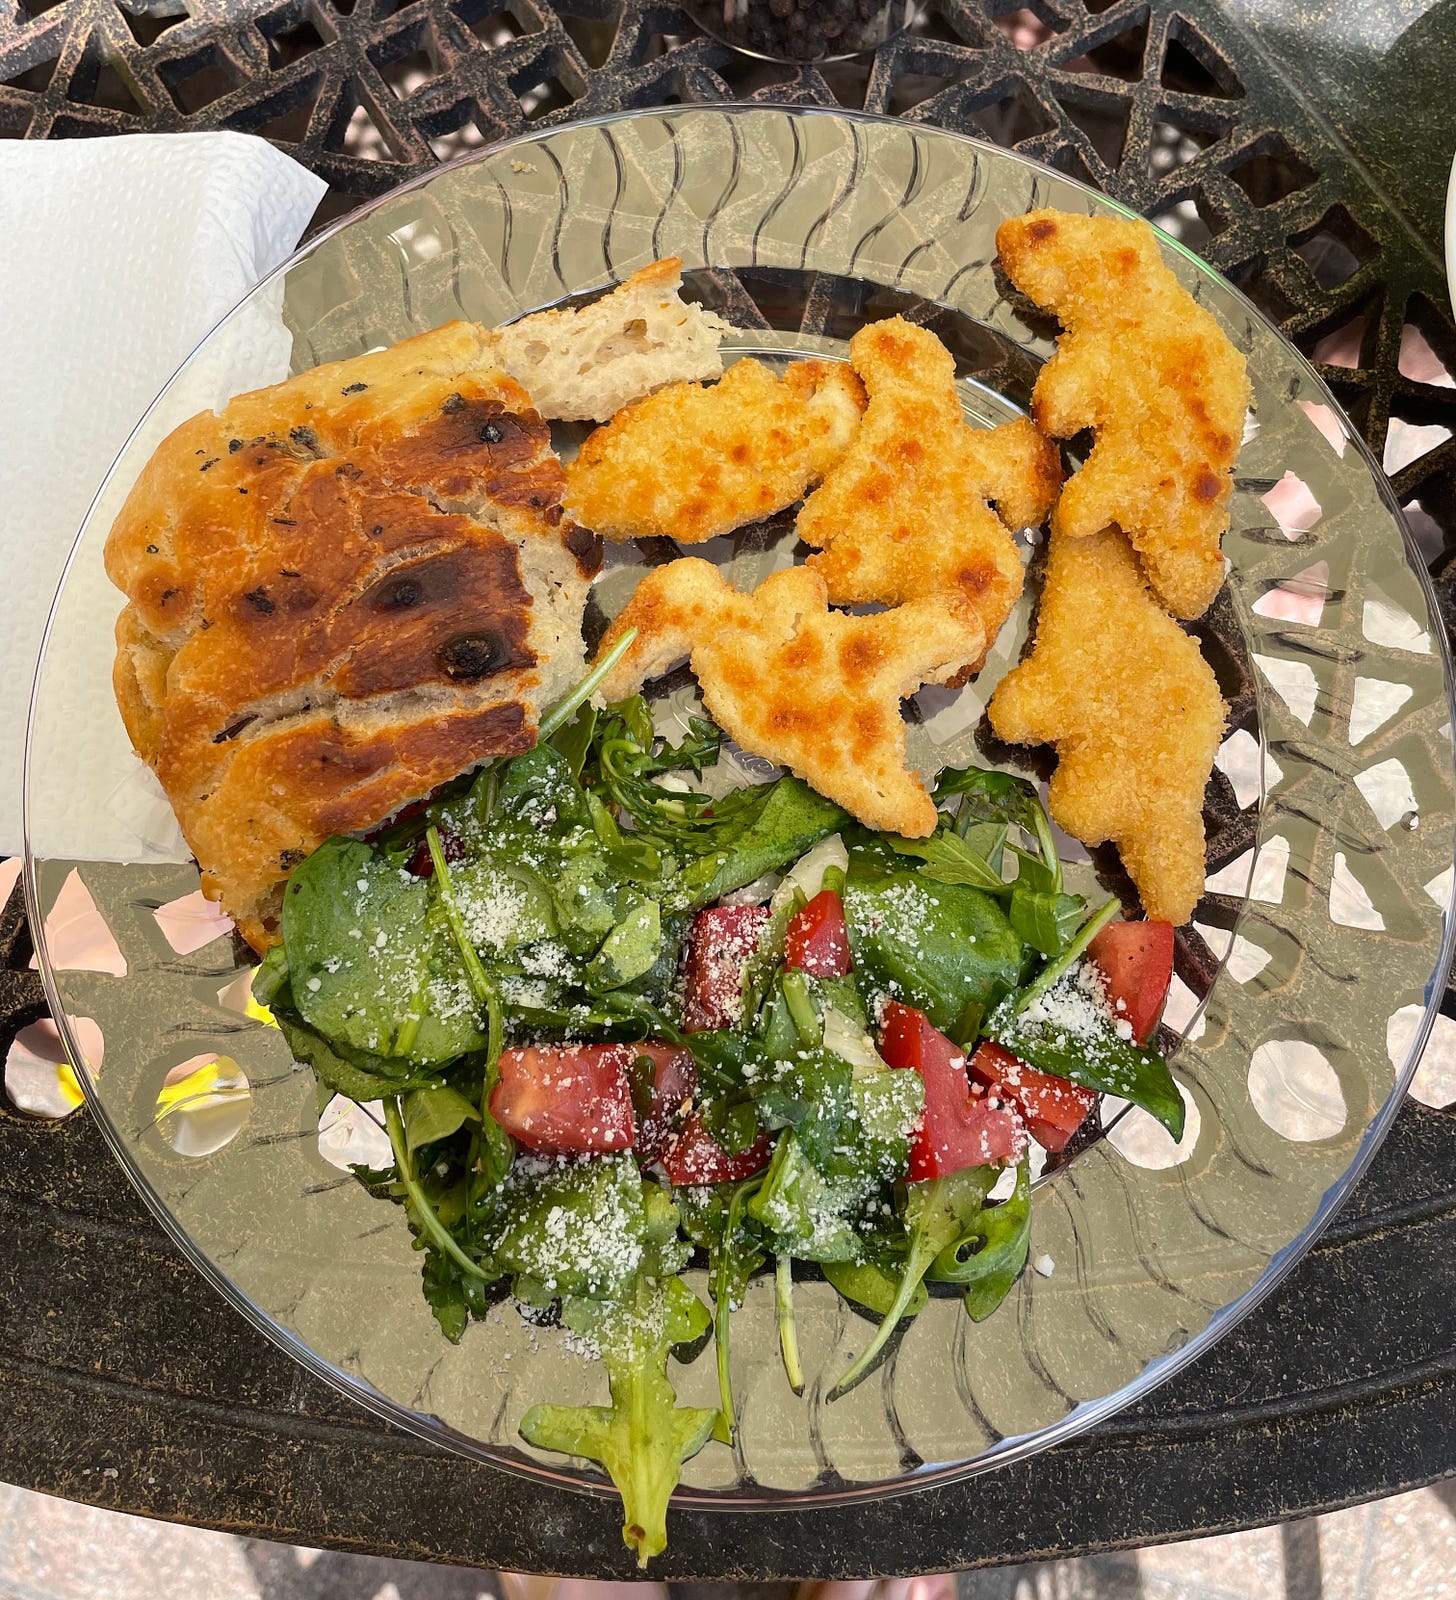 plate with foccacia, dino chicken nuggets, and green salad